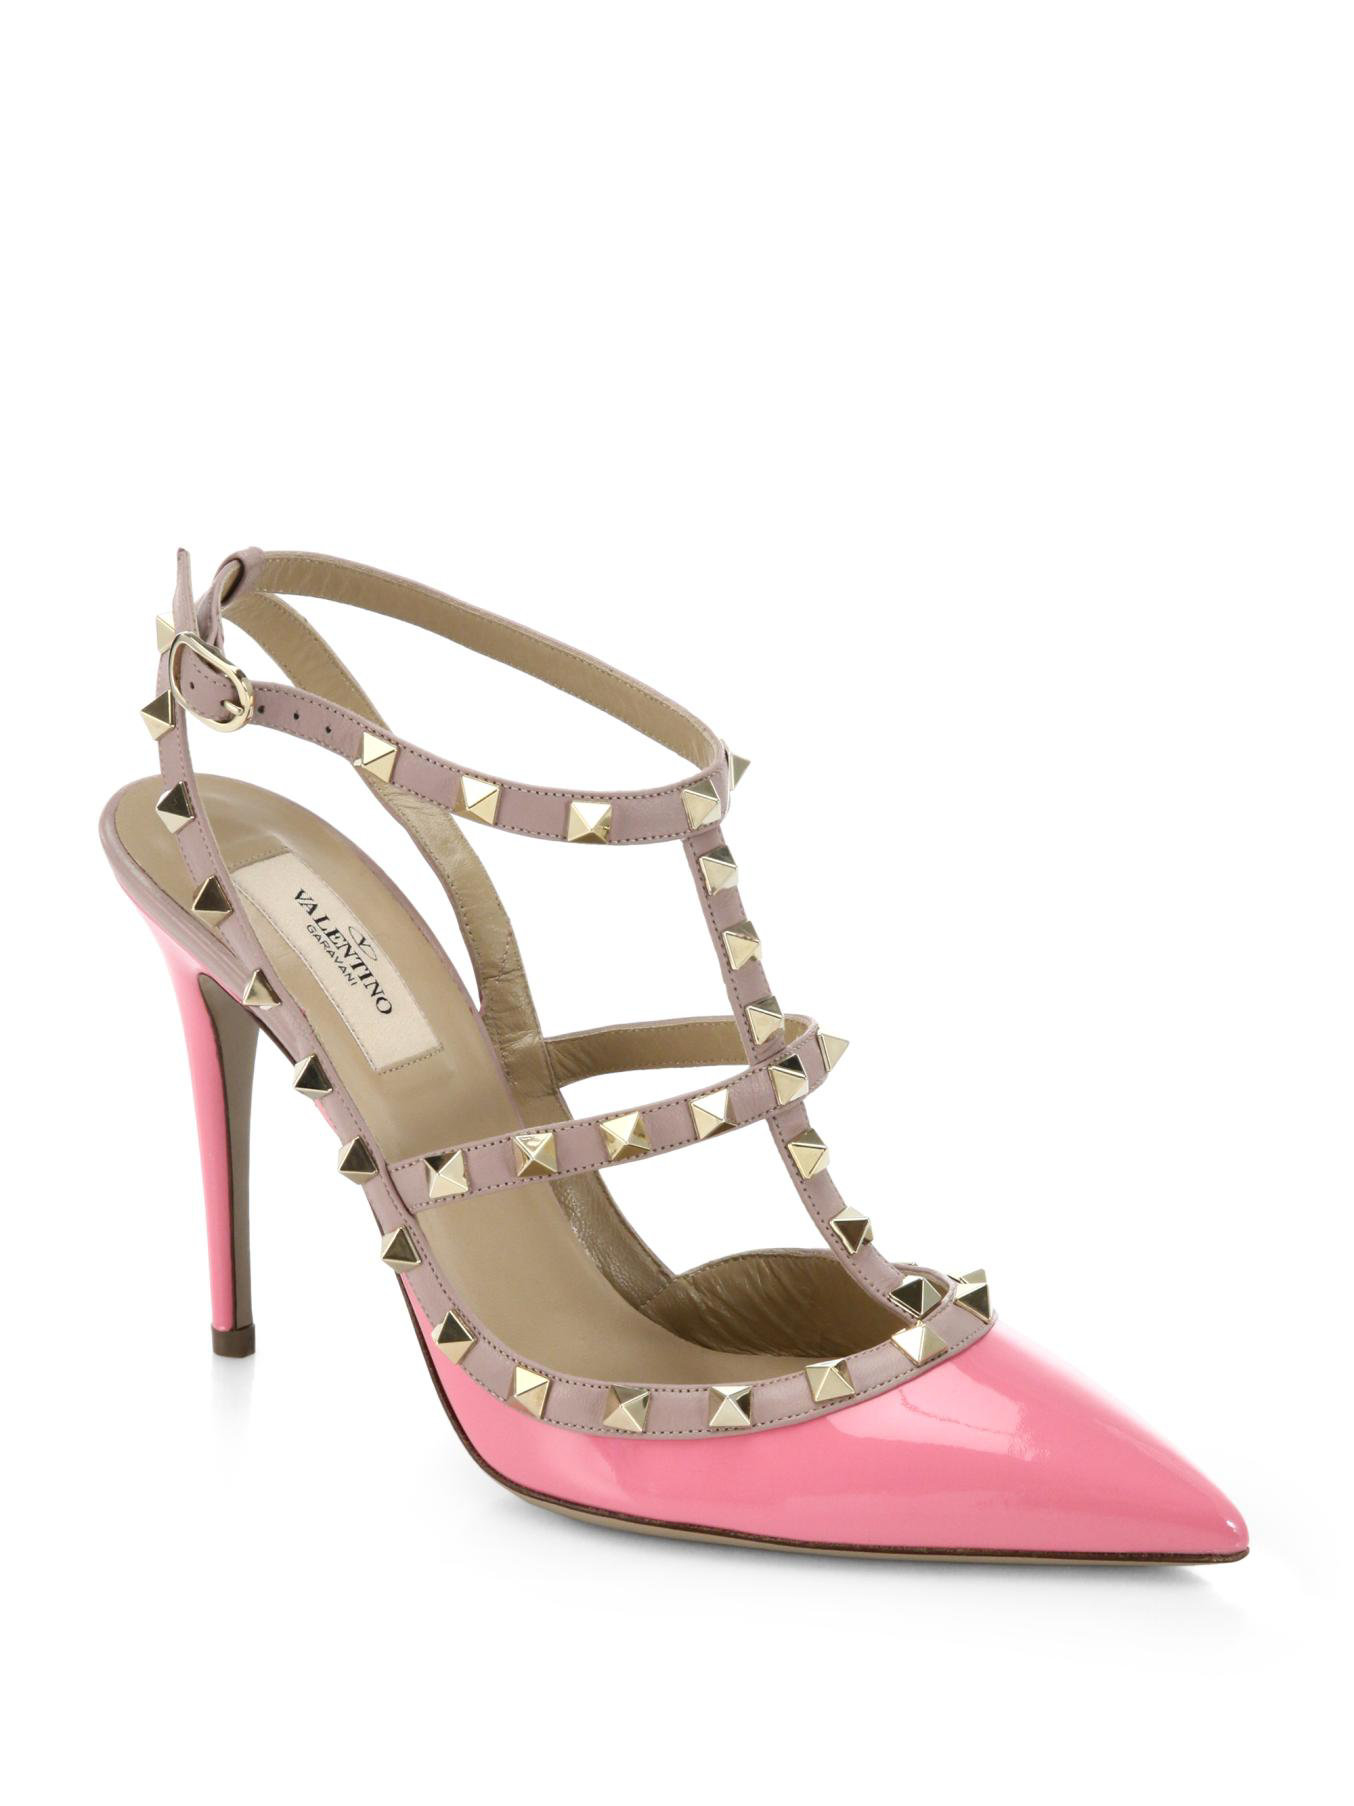 Valentino Patent Leather Rockstud Slingback Pumps in Pink | Lyst